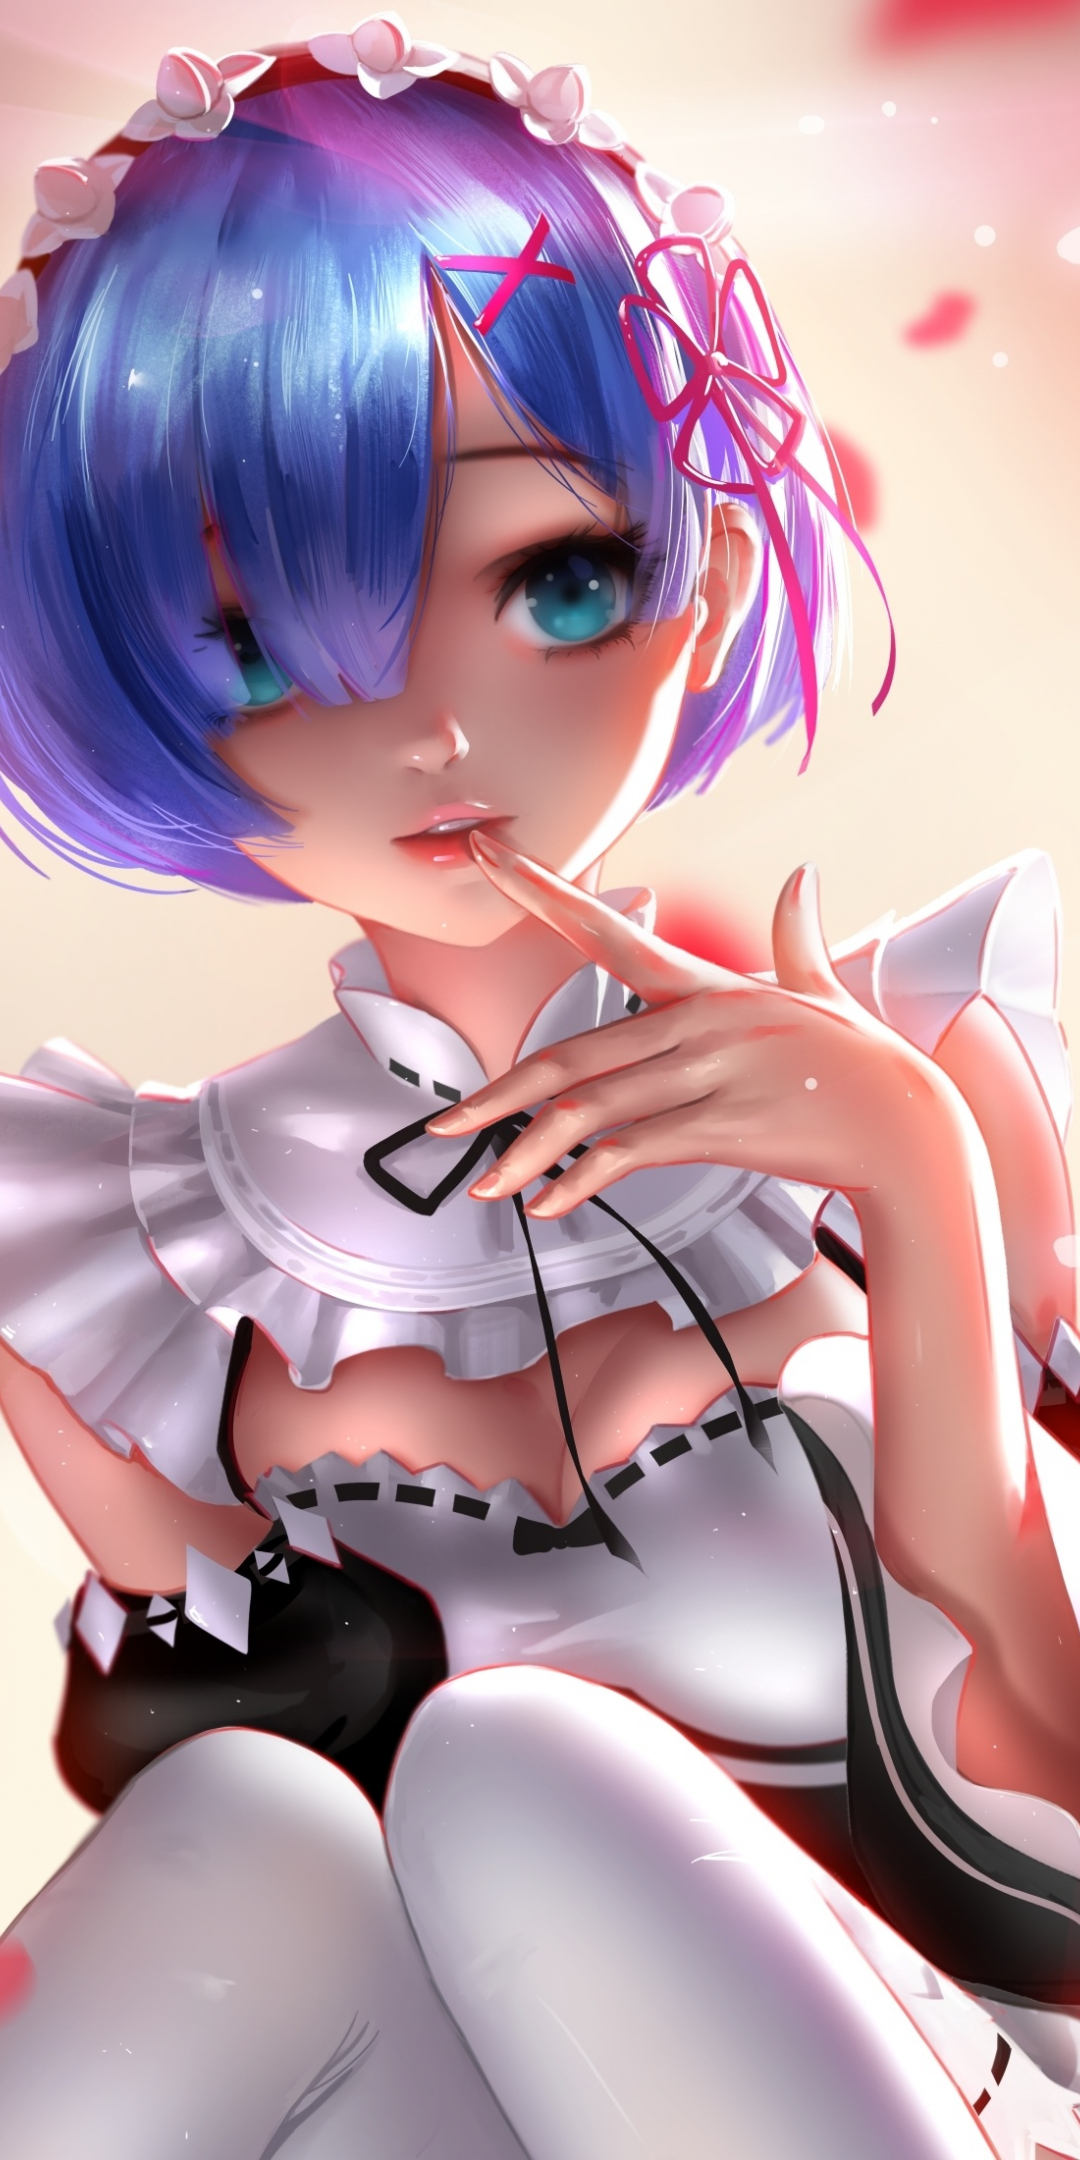 Download 1080x2160 Wallpaper Hot Rem Re Zero Anime Girl Artwork Honor 7x Honor 9 Lite Honor View 10 Hd Image Background 8769